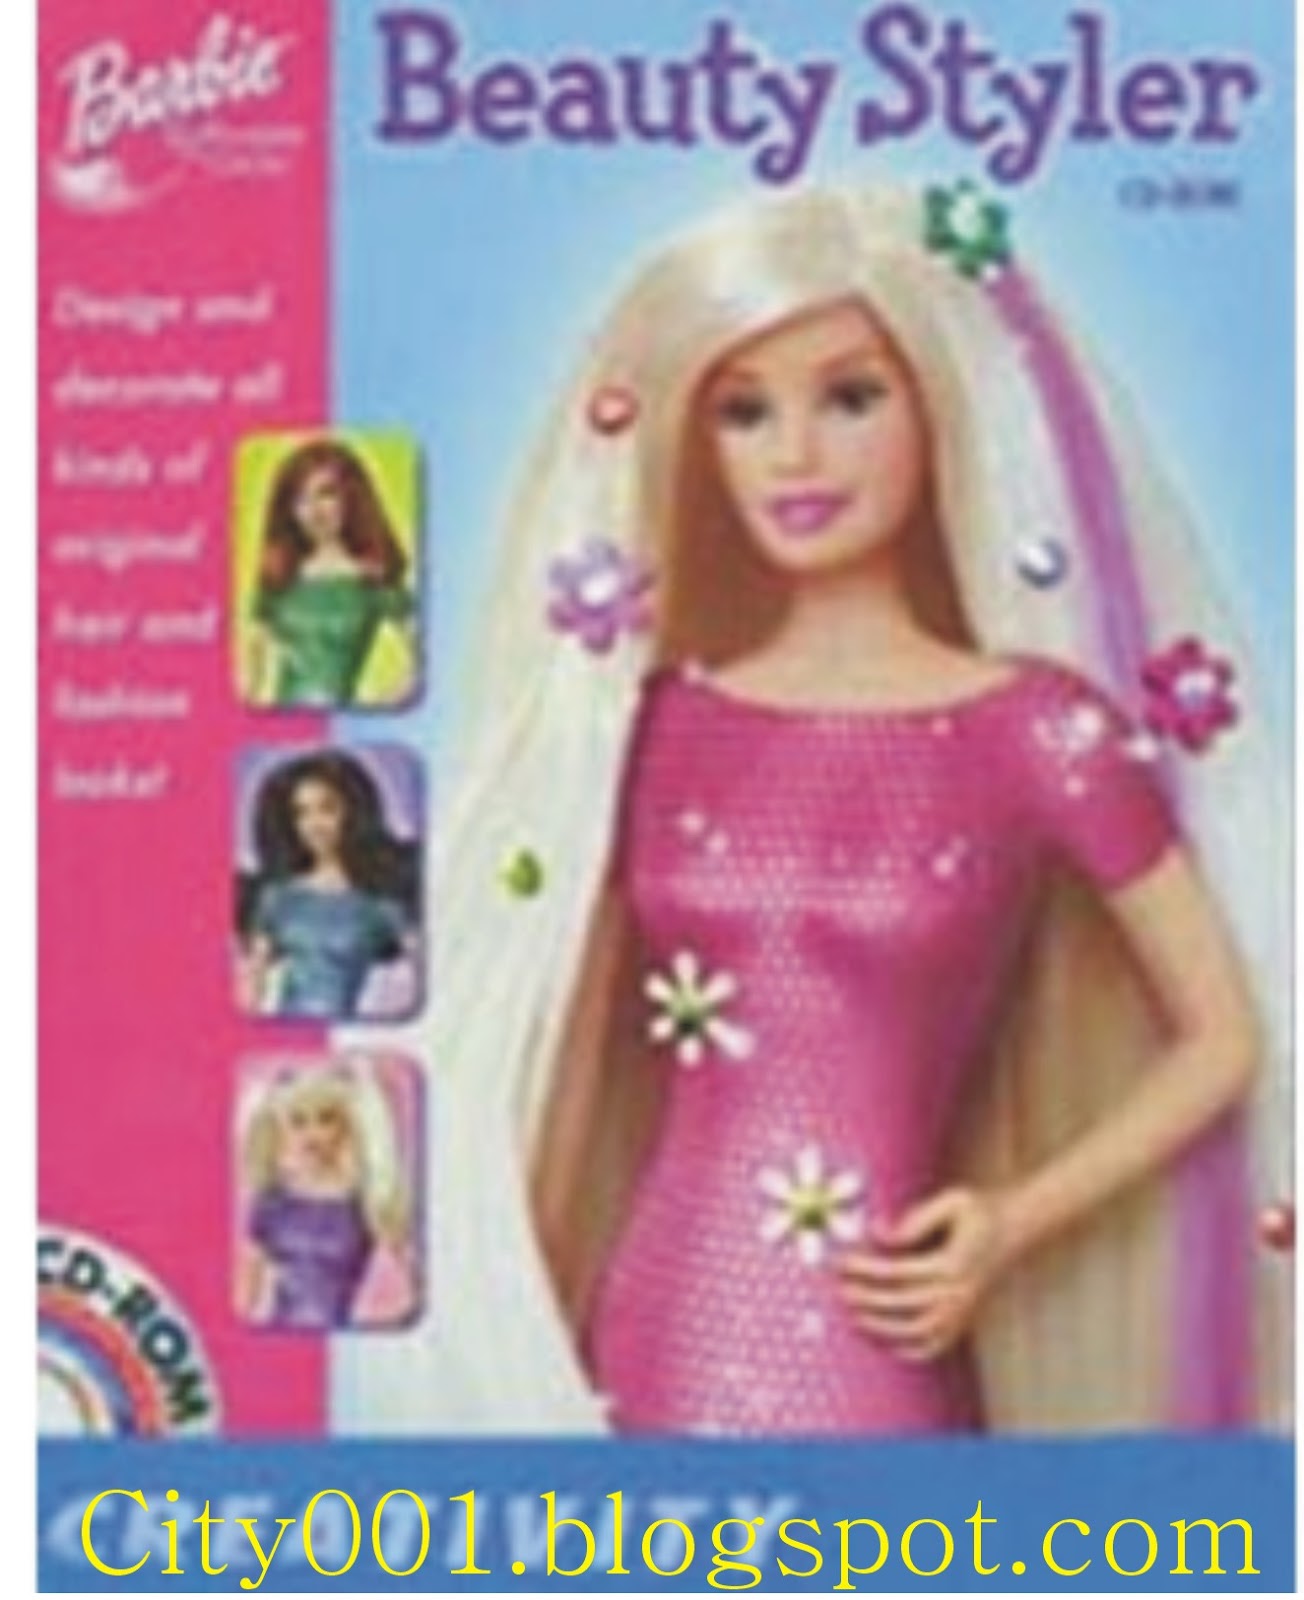 barbie game for pc